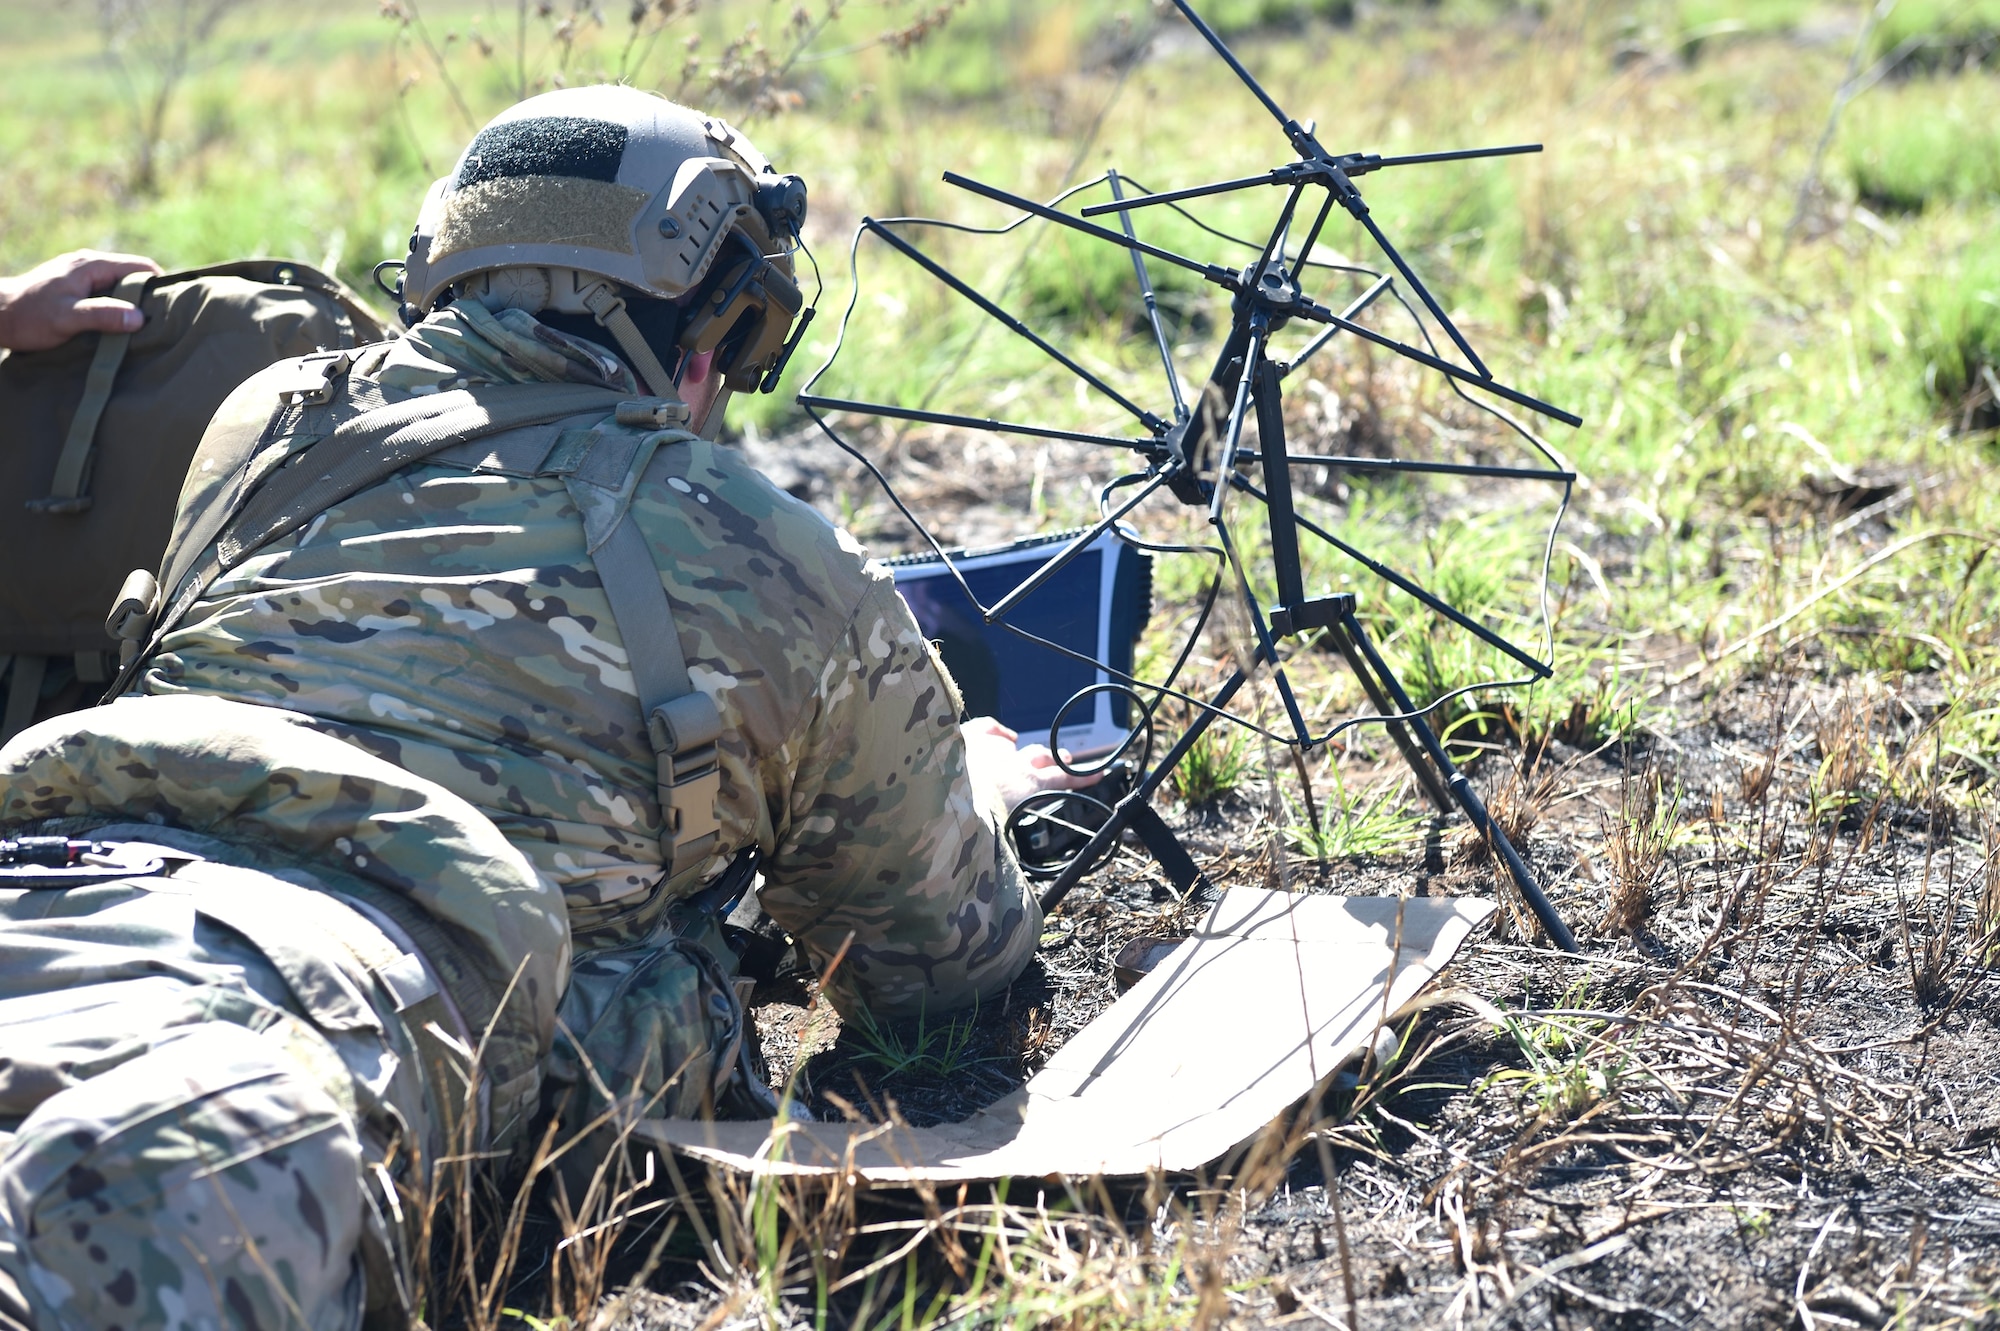 An Air Force combat controller with the 320th Special Tactics Squadron sends data over a network using a satellite communication antenna and a laptop during a humanitarian assistance and disaster response scenario as part of Rim of the Pacific (RIMPAC) 2016, Pohakuloa Training Area, Hawaii, July 10, 2016. RIMPAC offers the 320th STS and III Marine Expeditionary Force an opportunity to team up and practice their unique skills to strengthen their partnership in order to respond to crises quickly. (U.S. Air Force photo by 2nd Lt. Jaclyn Pienkowski/Released)